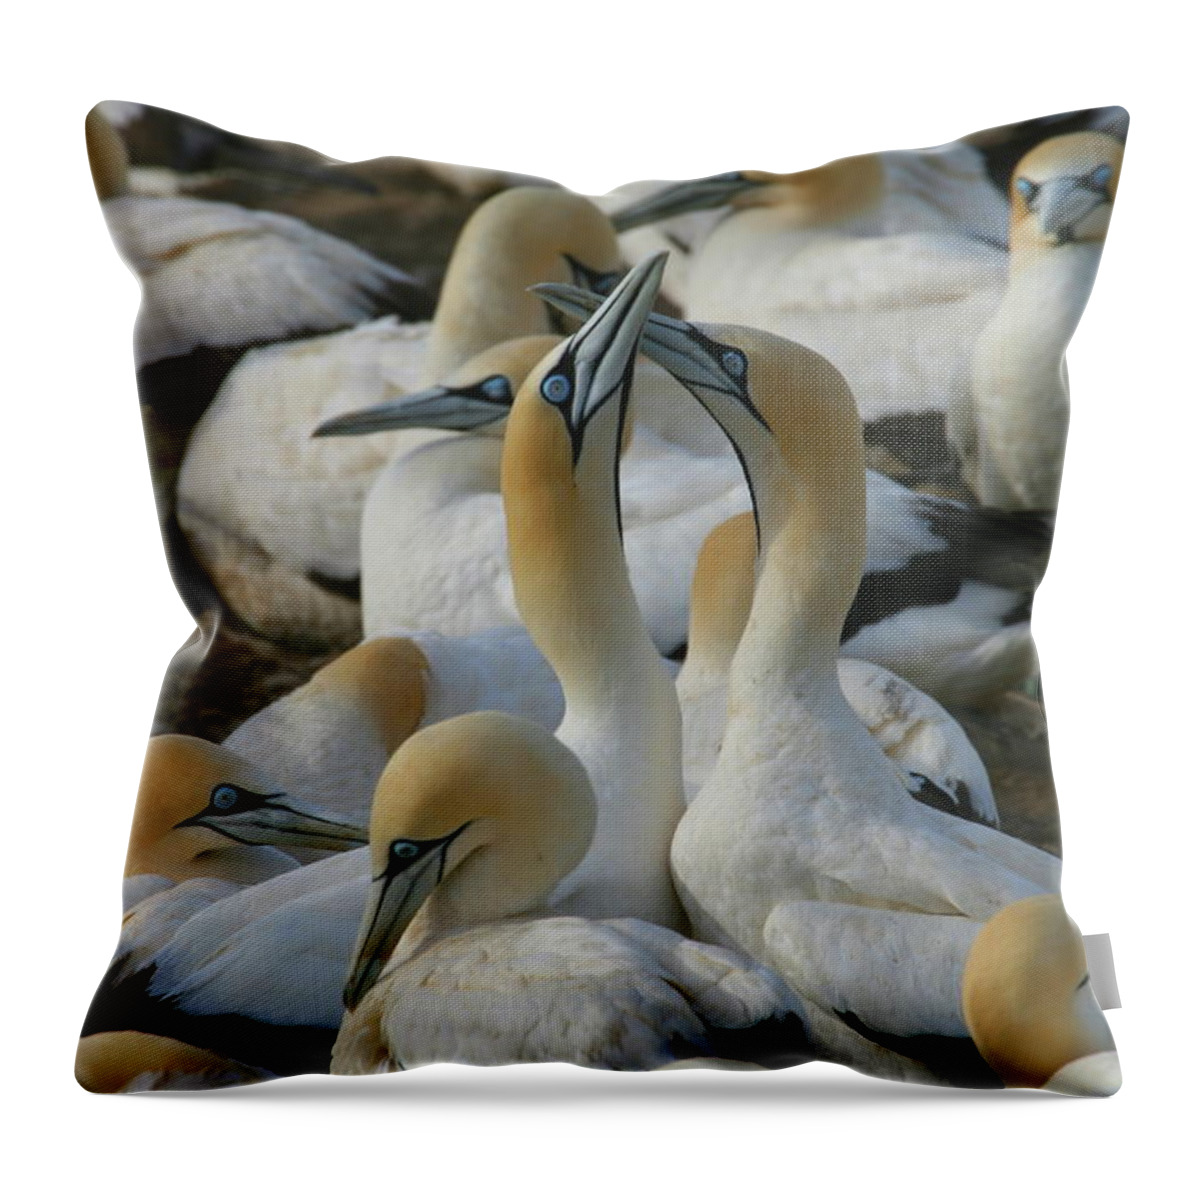 Gannet Throw Pillow featuring the photograph Cape Gannets by Bruce J Robinson